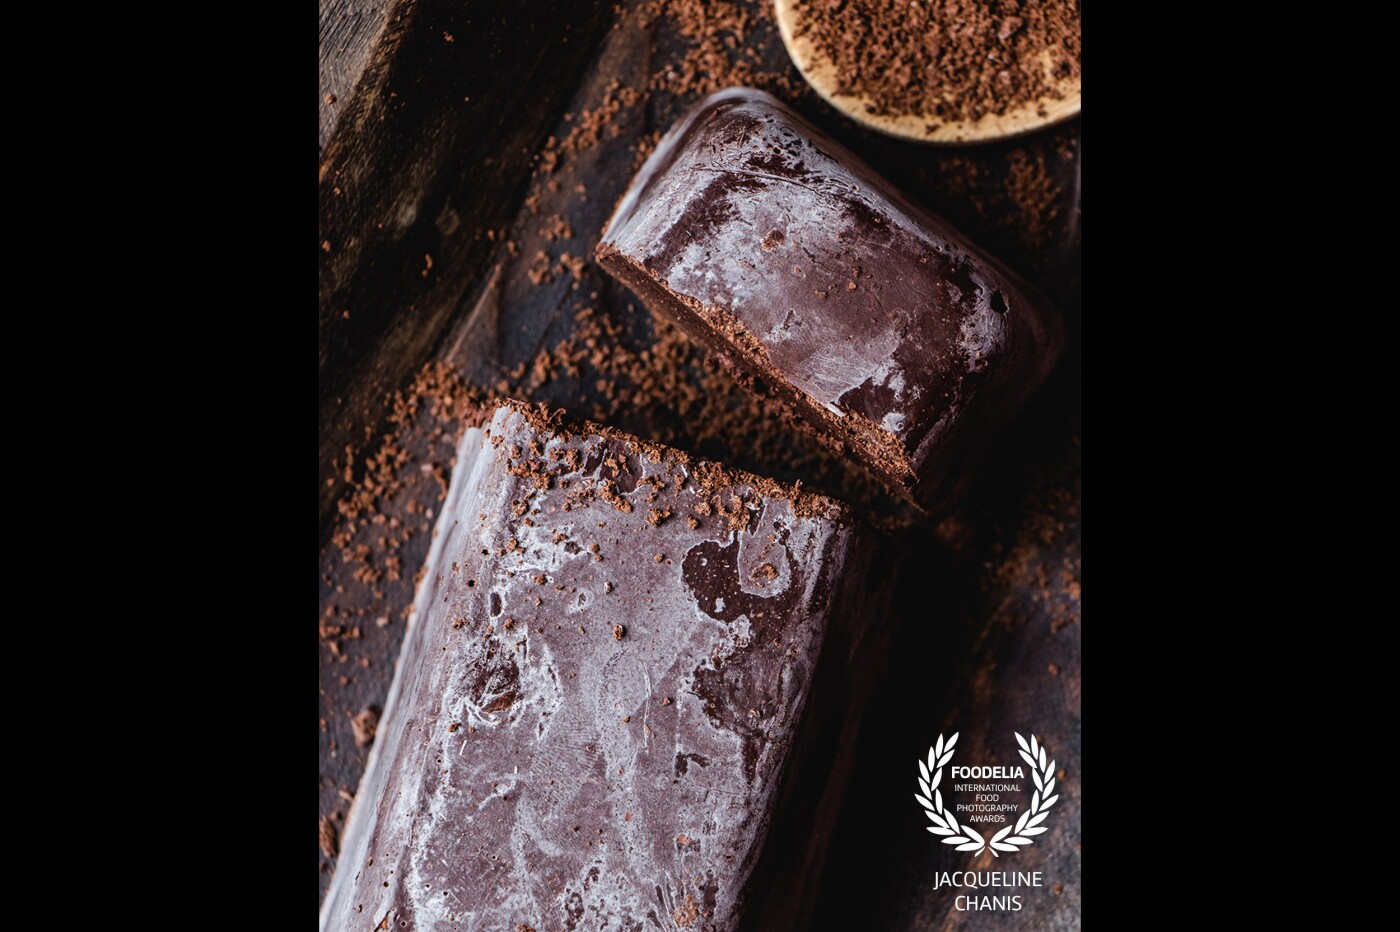 There are textures that it is impossible not to fall in love with, take your camera and shoot. This 100% cocoa bar is proudly from our Panamanian lands and it was taken with natural light.